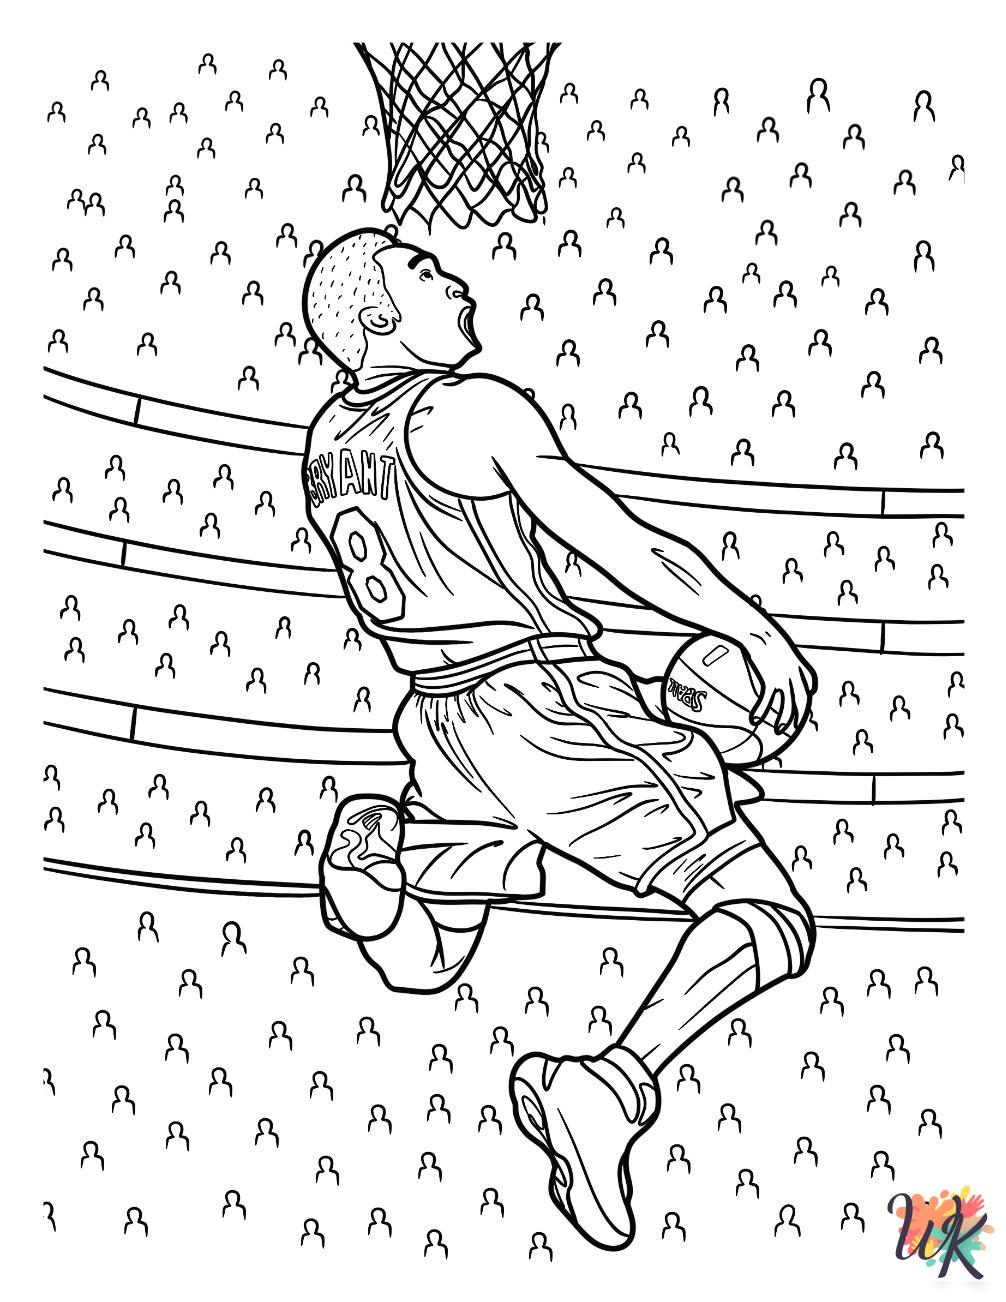 Kobe Bryant themed coloring pages